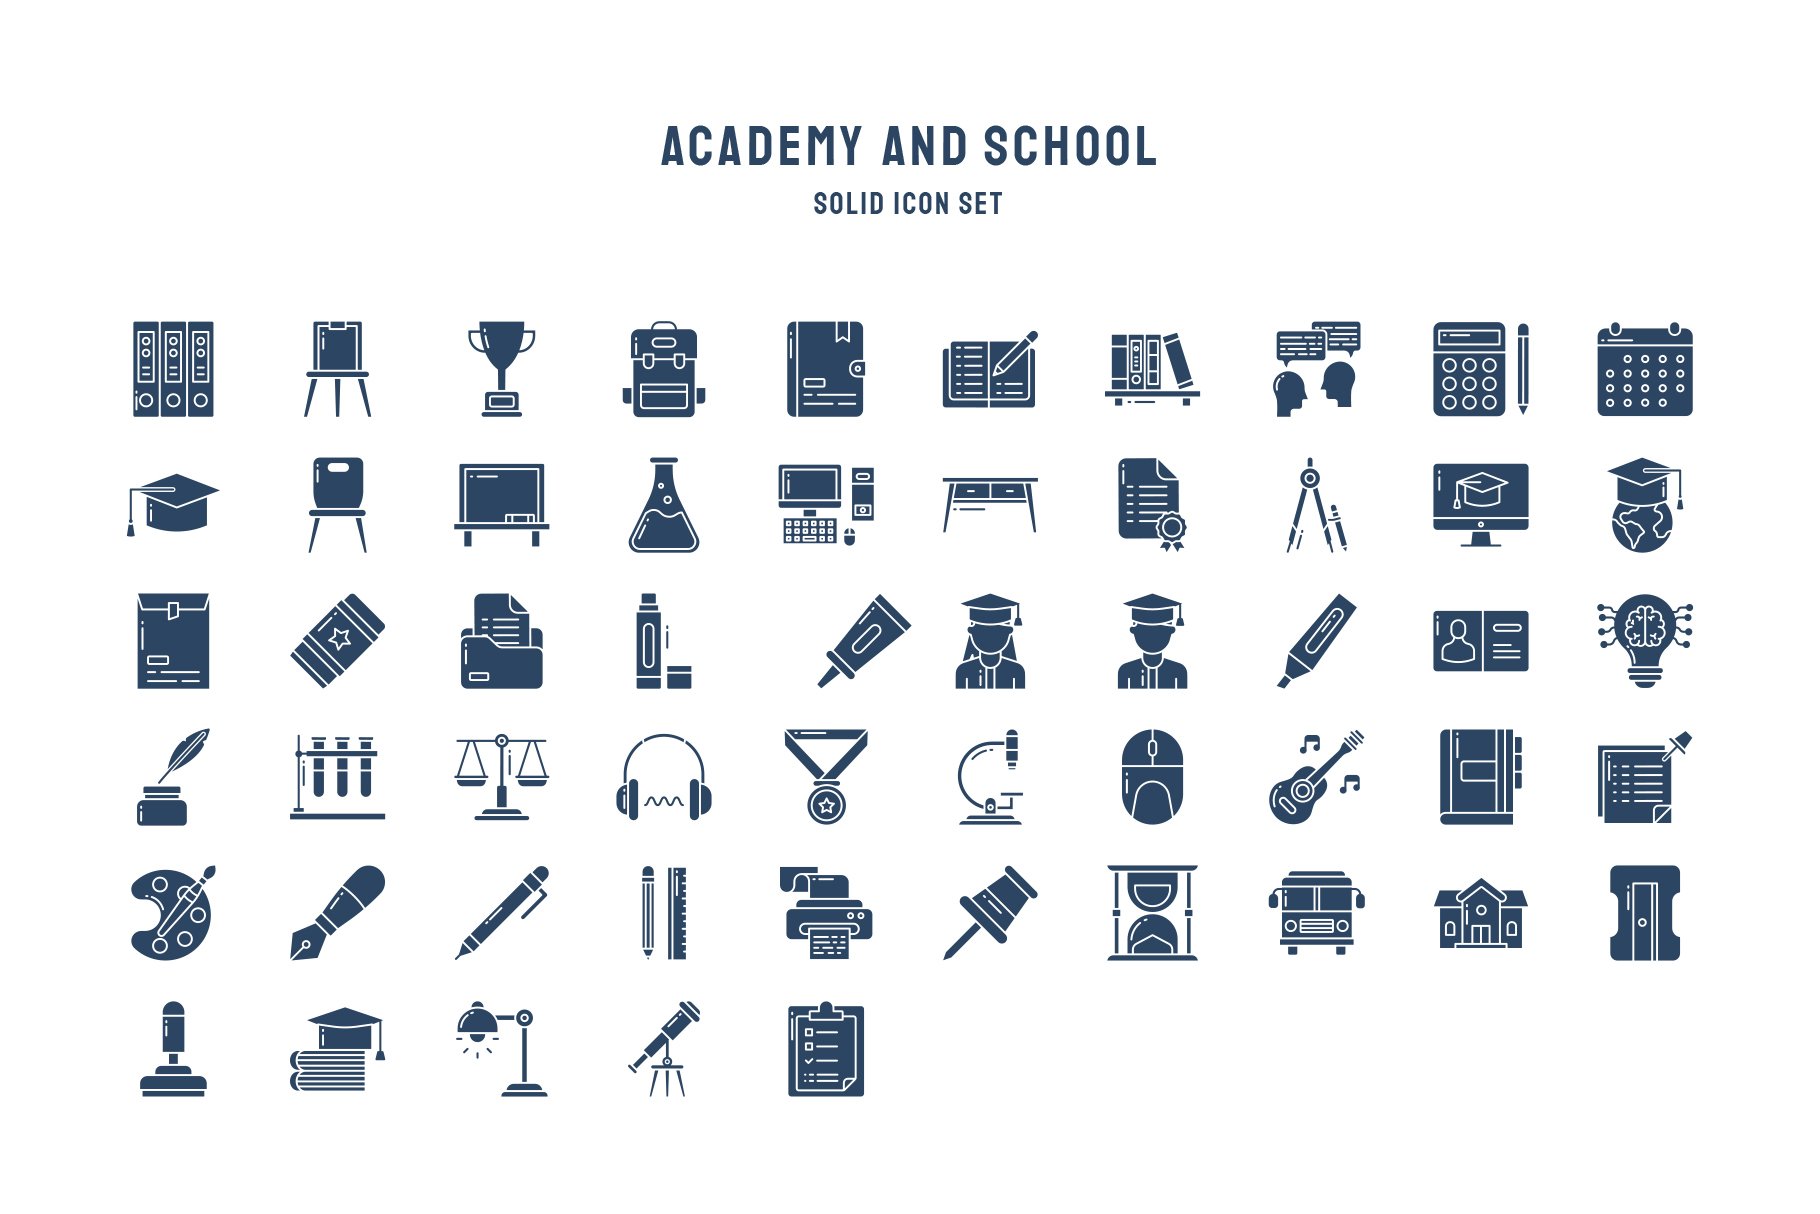 Academy and school icon cover image.